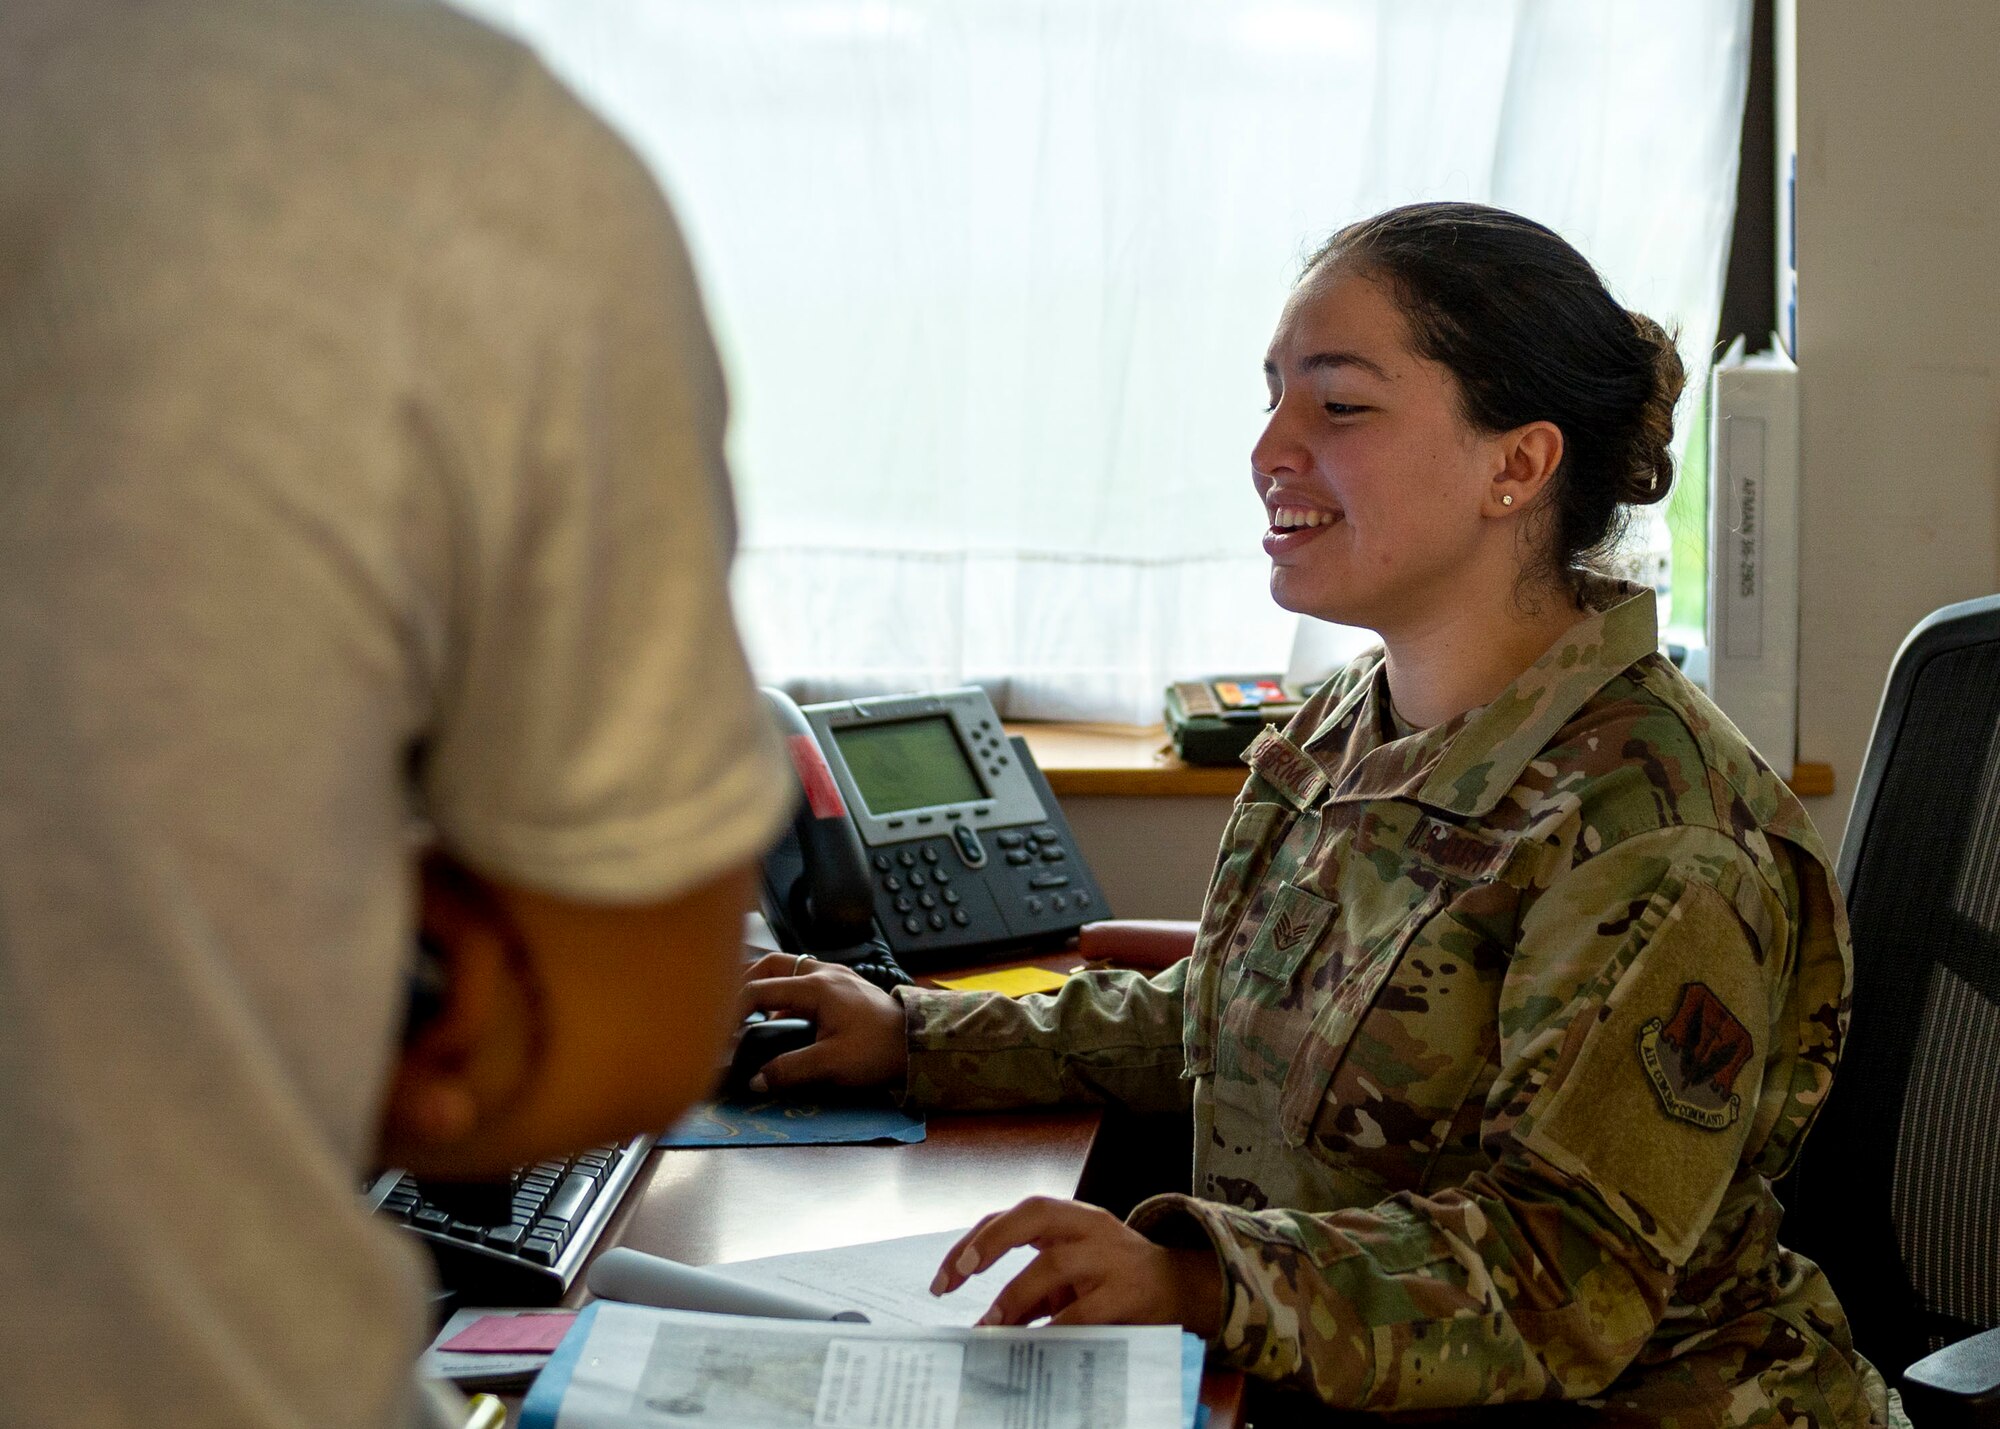 Staff Sgt. Mariana Bermudez, 4th Force Support Squadron fitness assessment cell technician, completes an Airman’s physical assessment paperwork at Seymour Johnson Air Force Base, North Carolina, July 16, 2021.